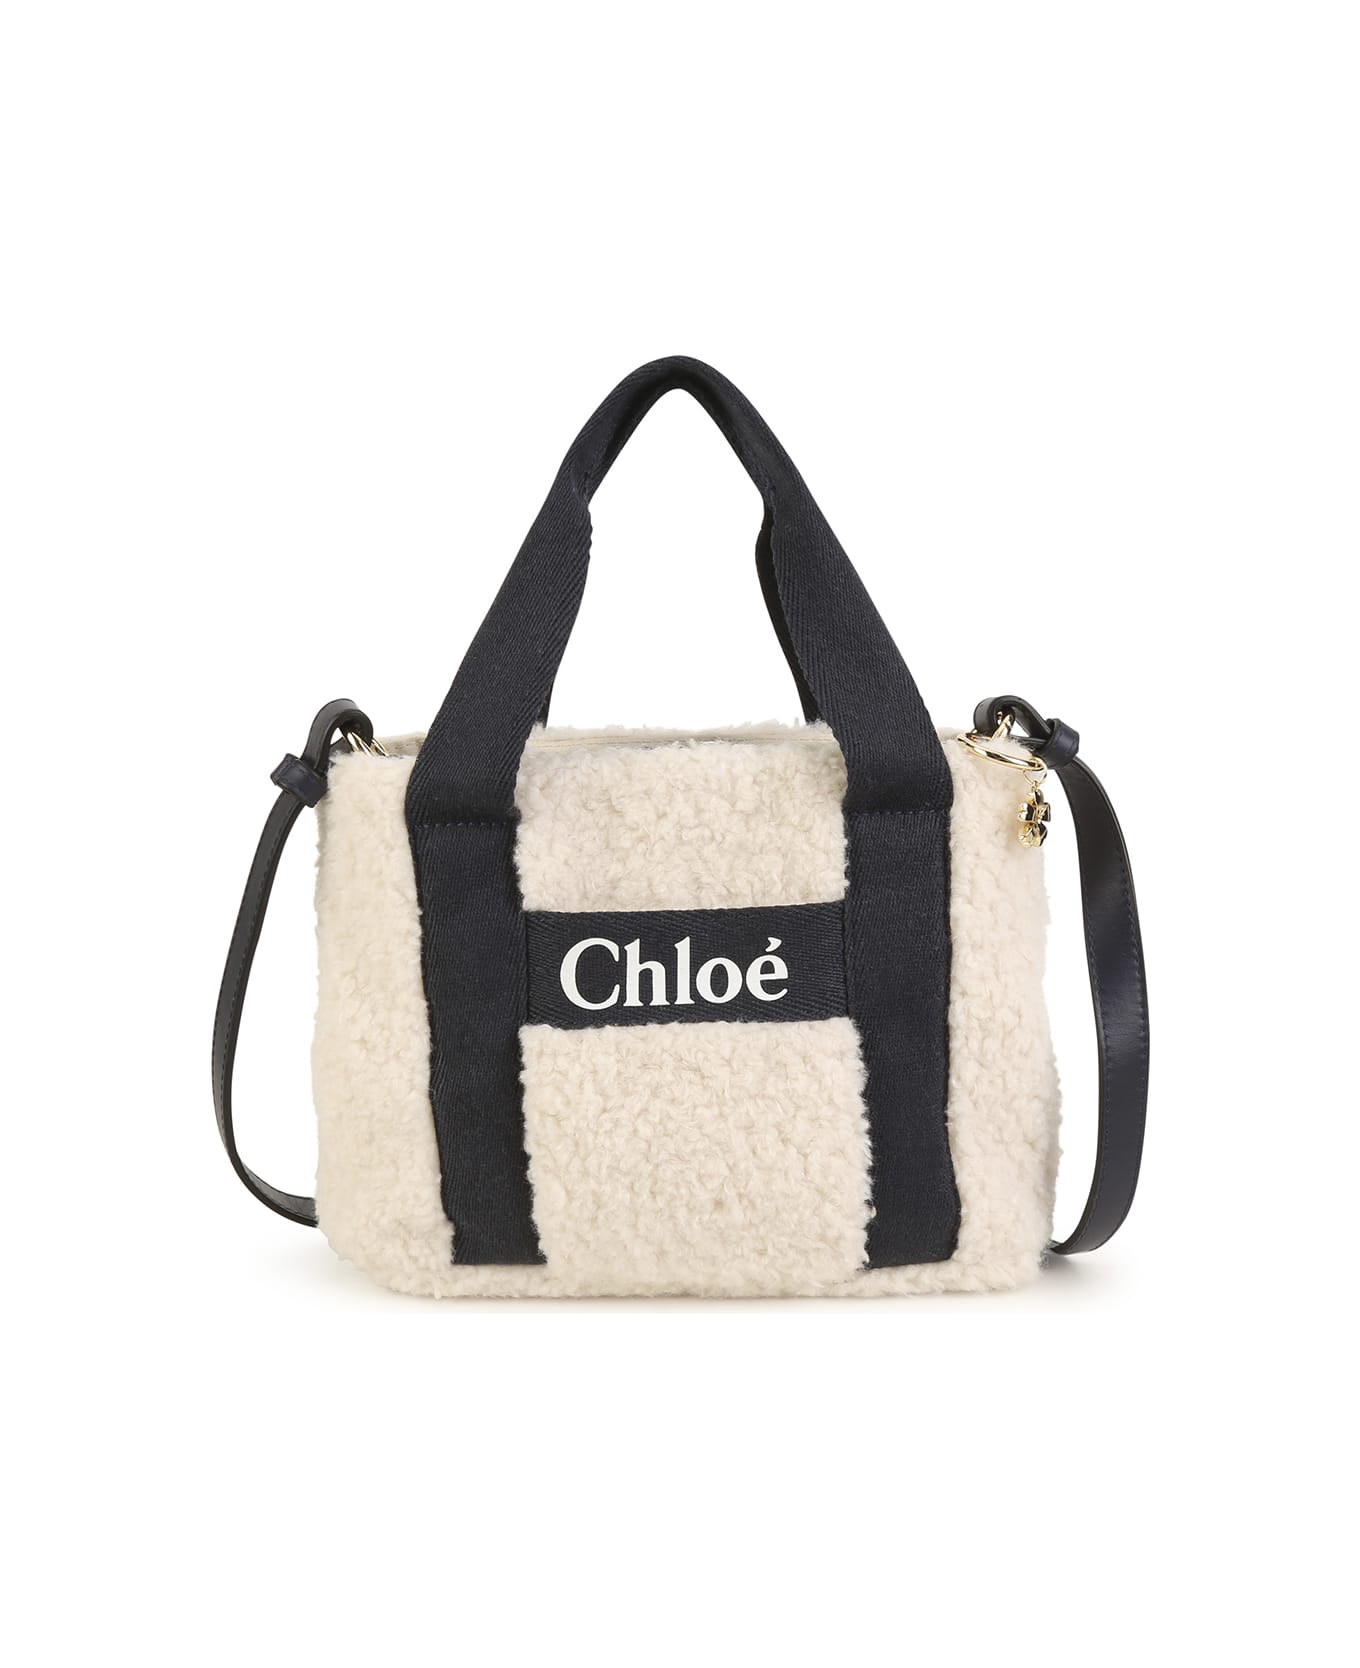 Fashion Look Featuring Chloé Shoulder Bags and Chloé Shoulder Bags